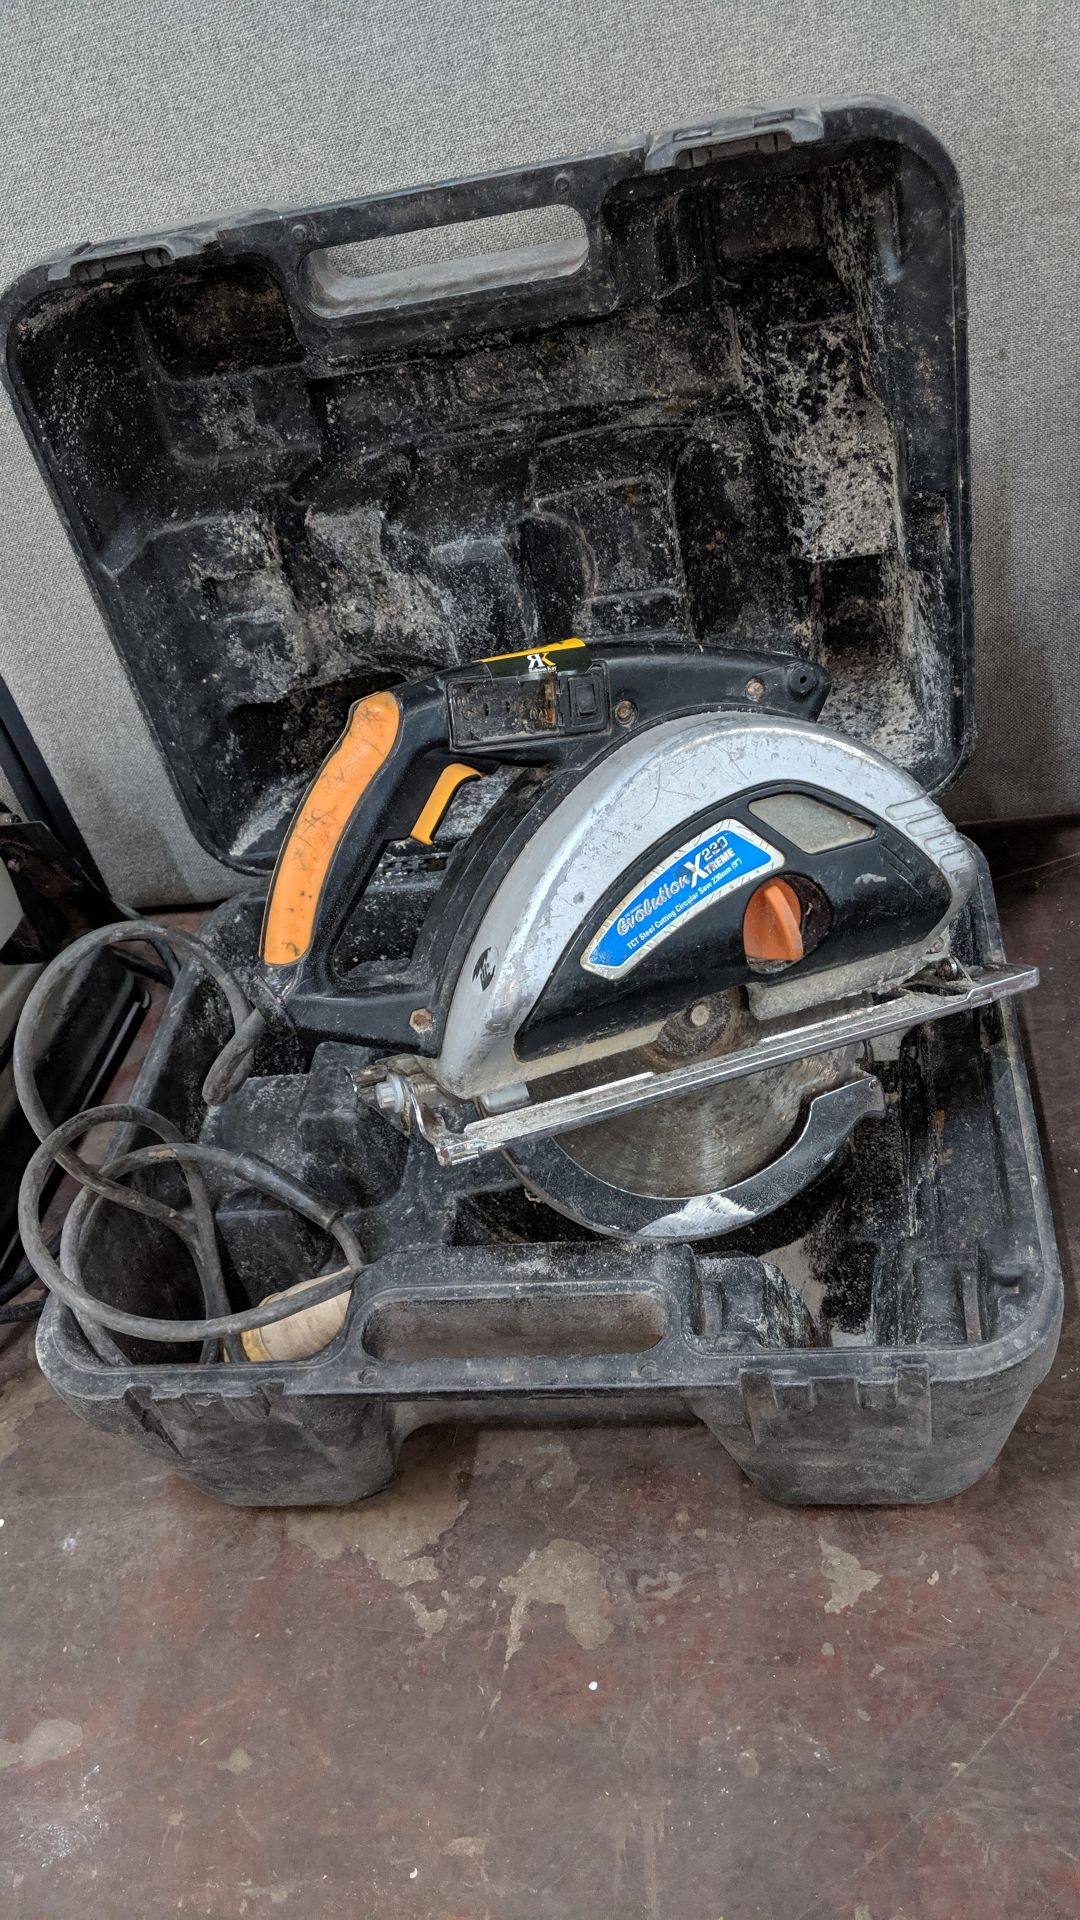 Evolution Xtreme 230 TCT steel cutting circular saw - 110v, includes case. This is one of a number